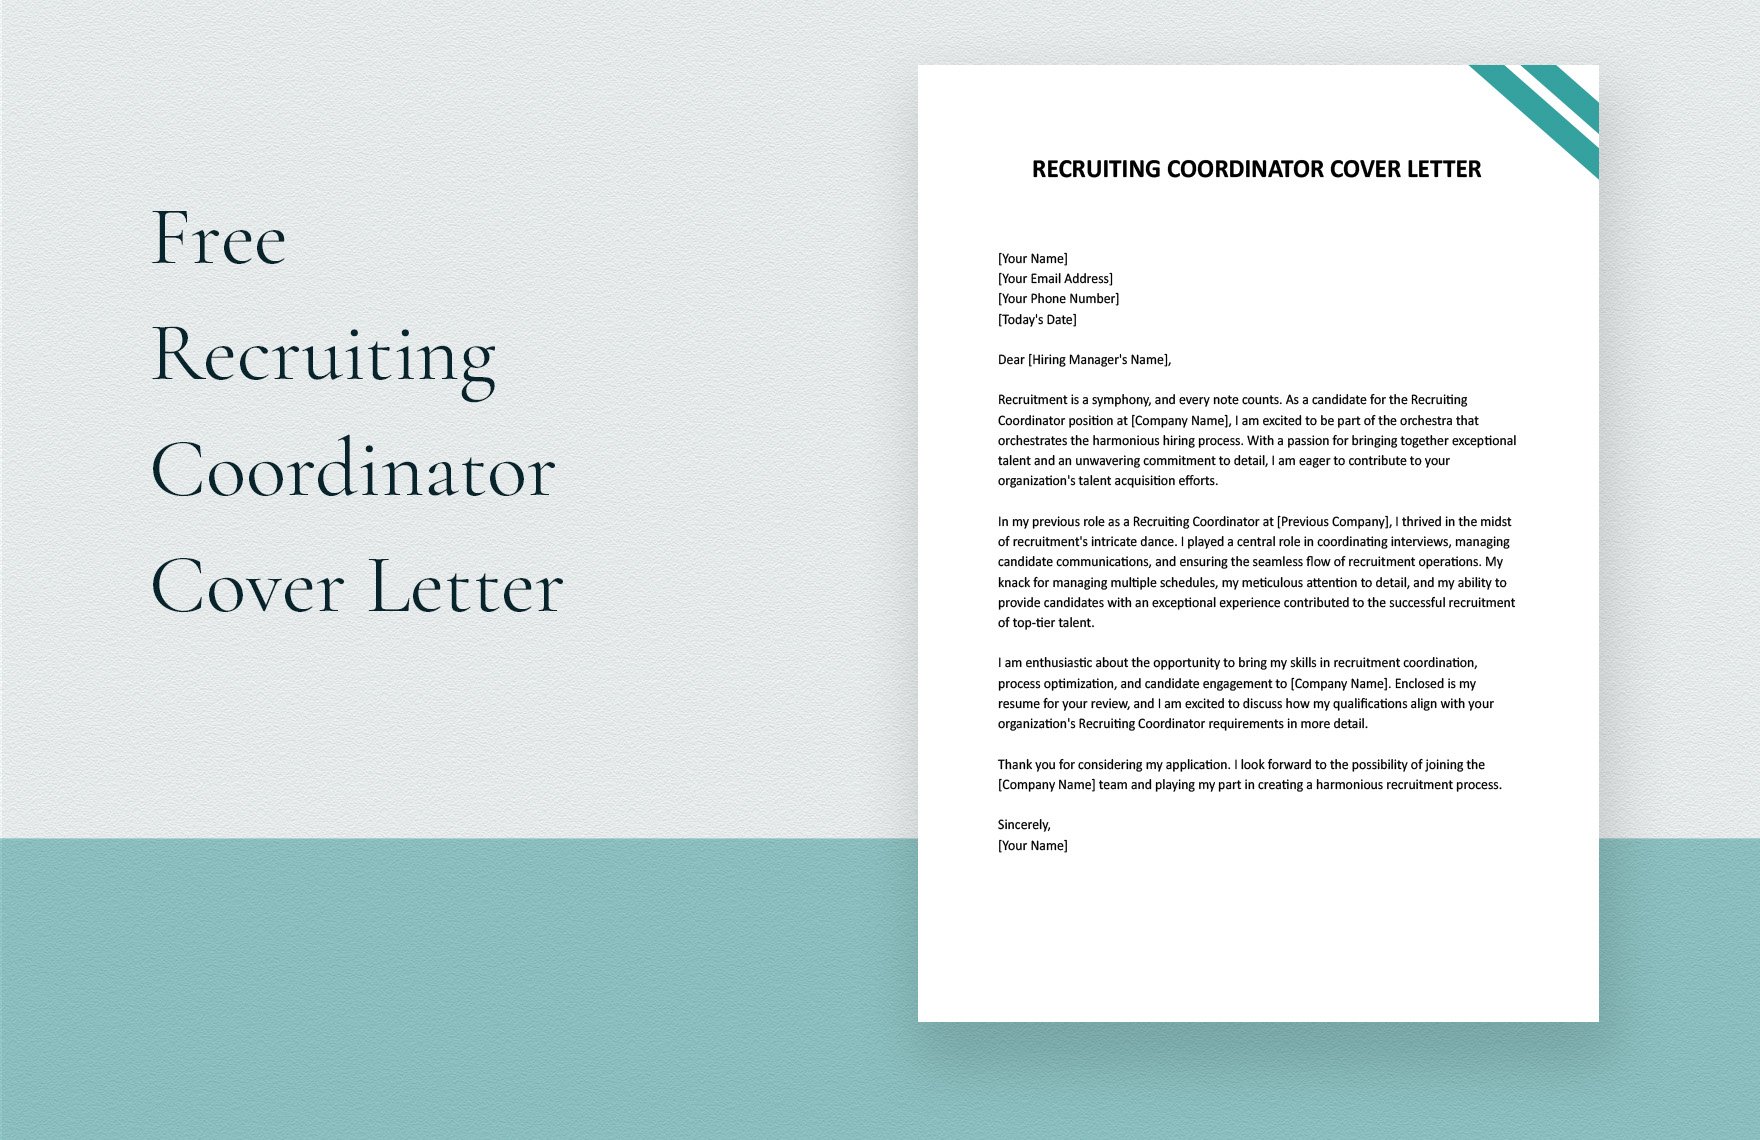 Recruiting Coordinator Cover Letter